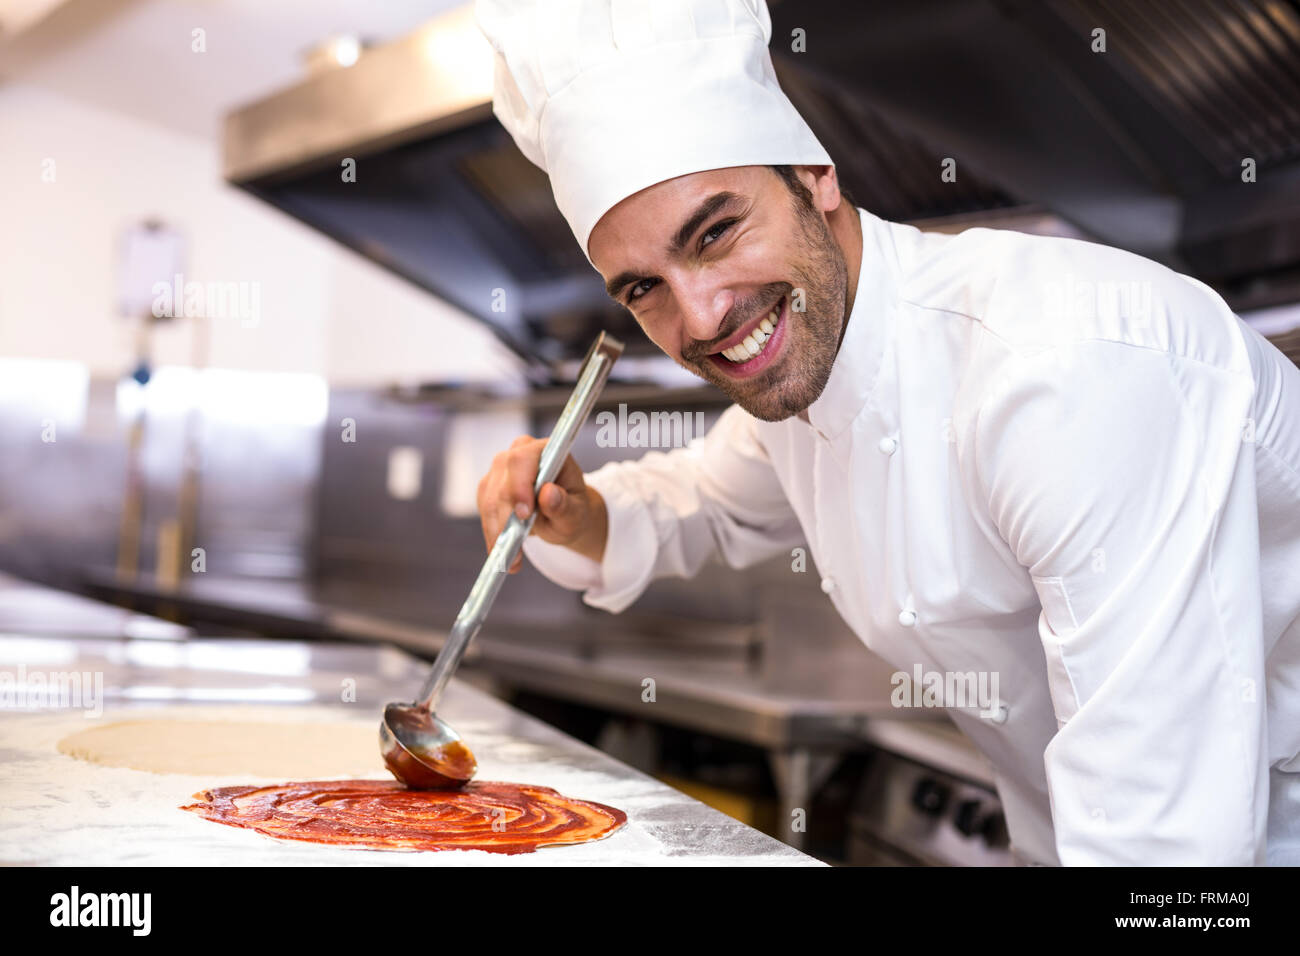 Chef with Pizza, #83394